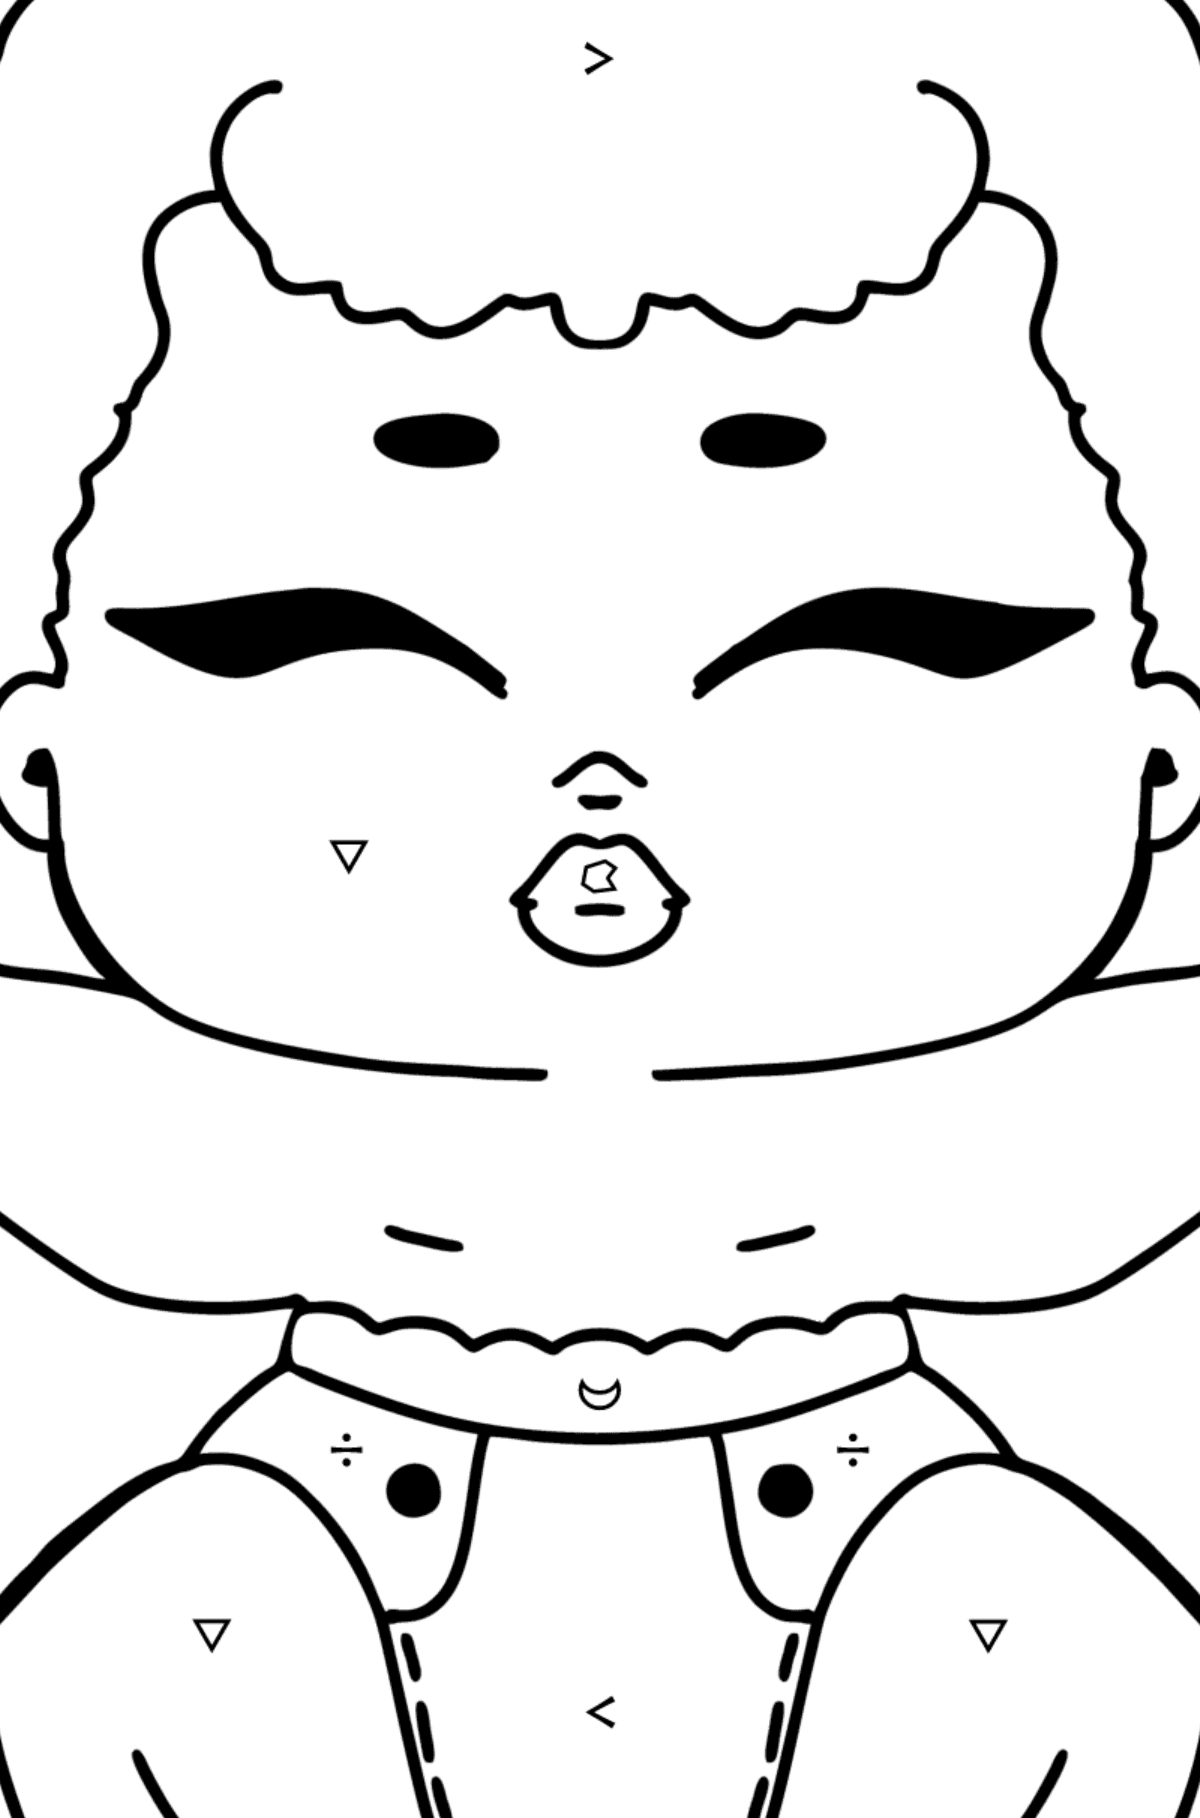 LOL Surprise Lil Sleeping B.B. coloring page - Coloring by Symbols and Geometric Shapes for Kids